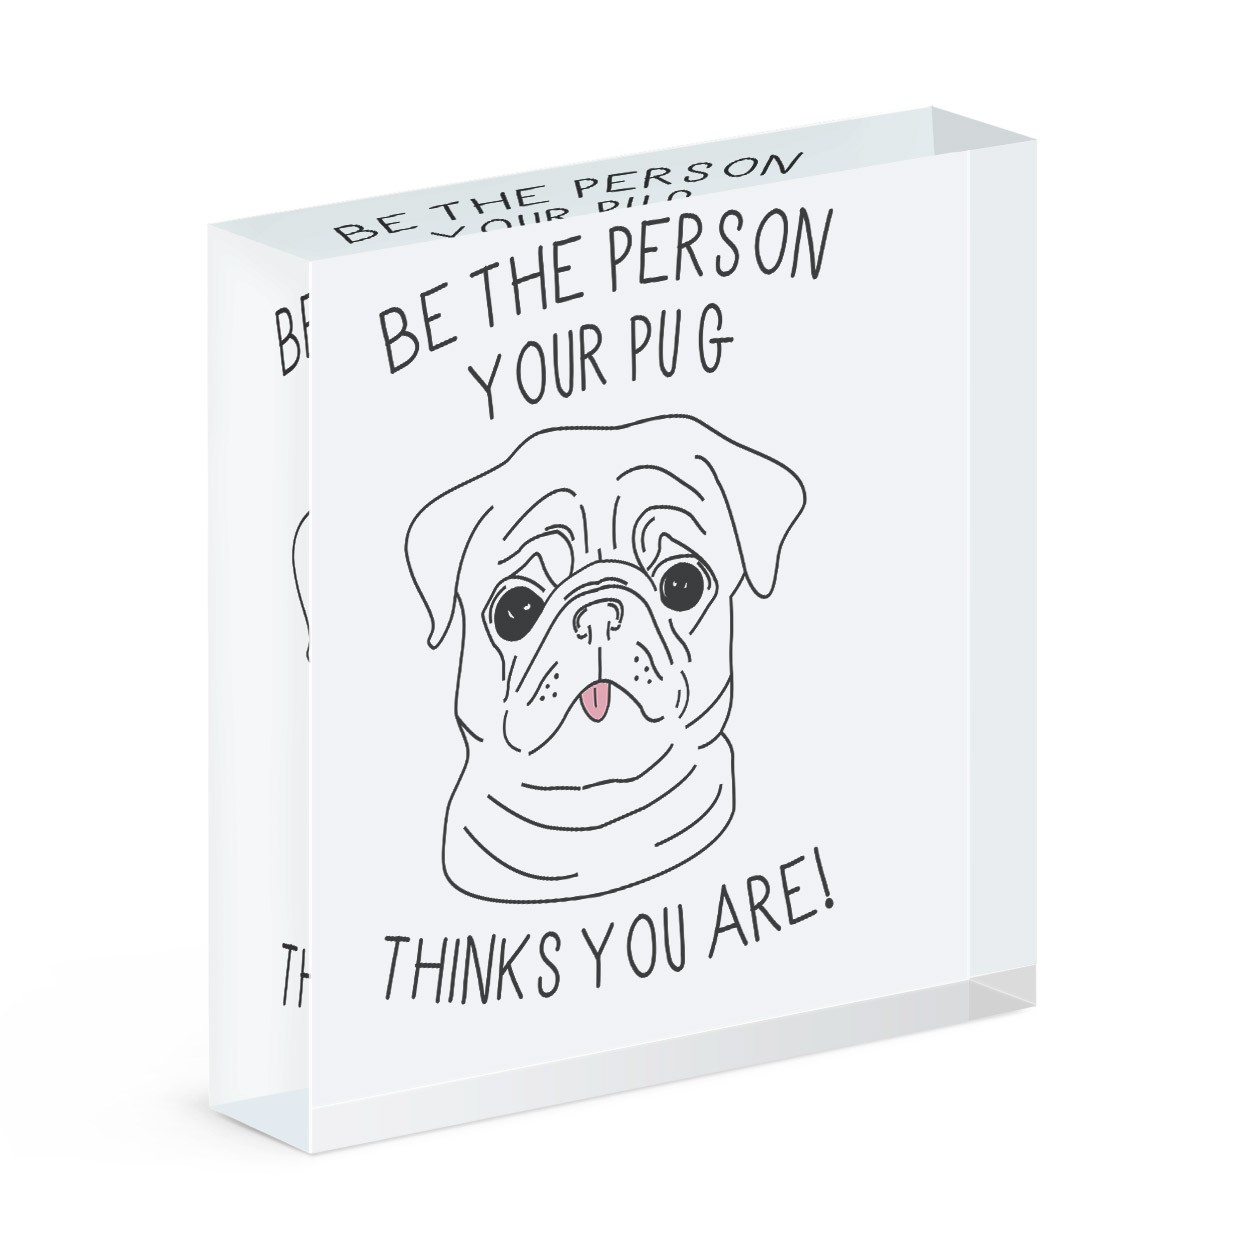 Be The Person Your Pug Thinks You Are Acrylic Block